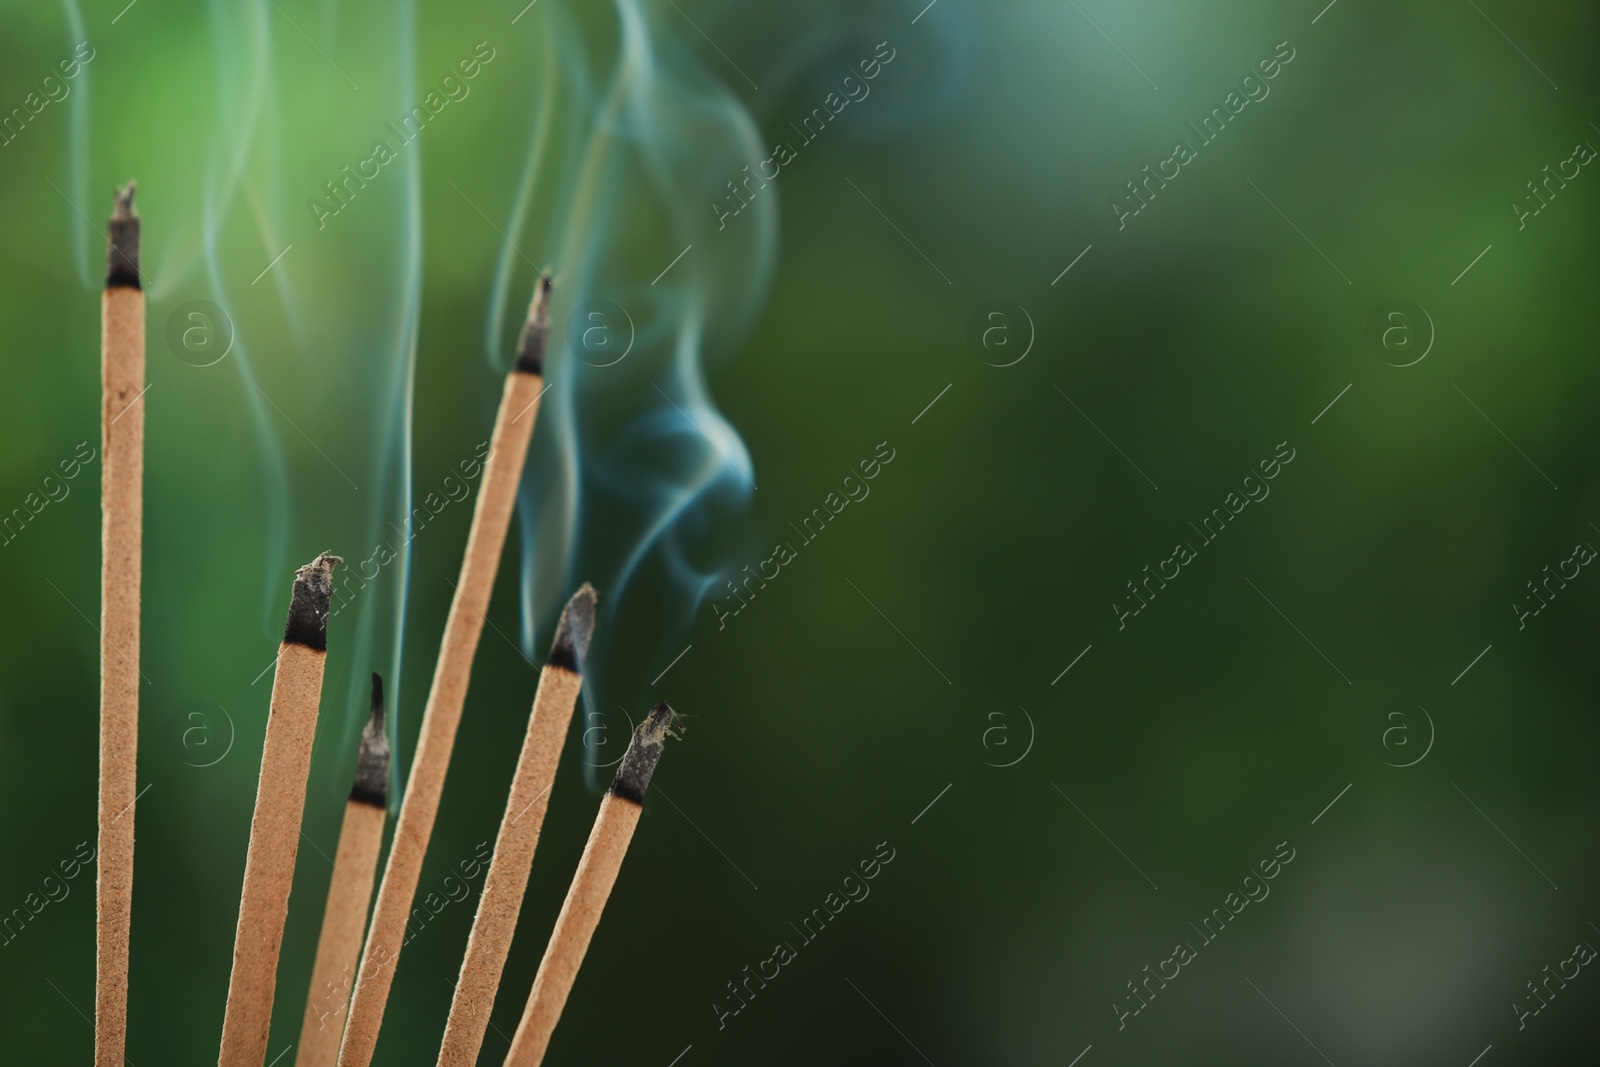 Photo of Incense sticks smoldering on green blurred background, space for text